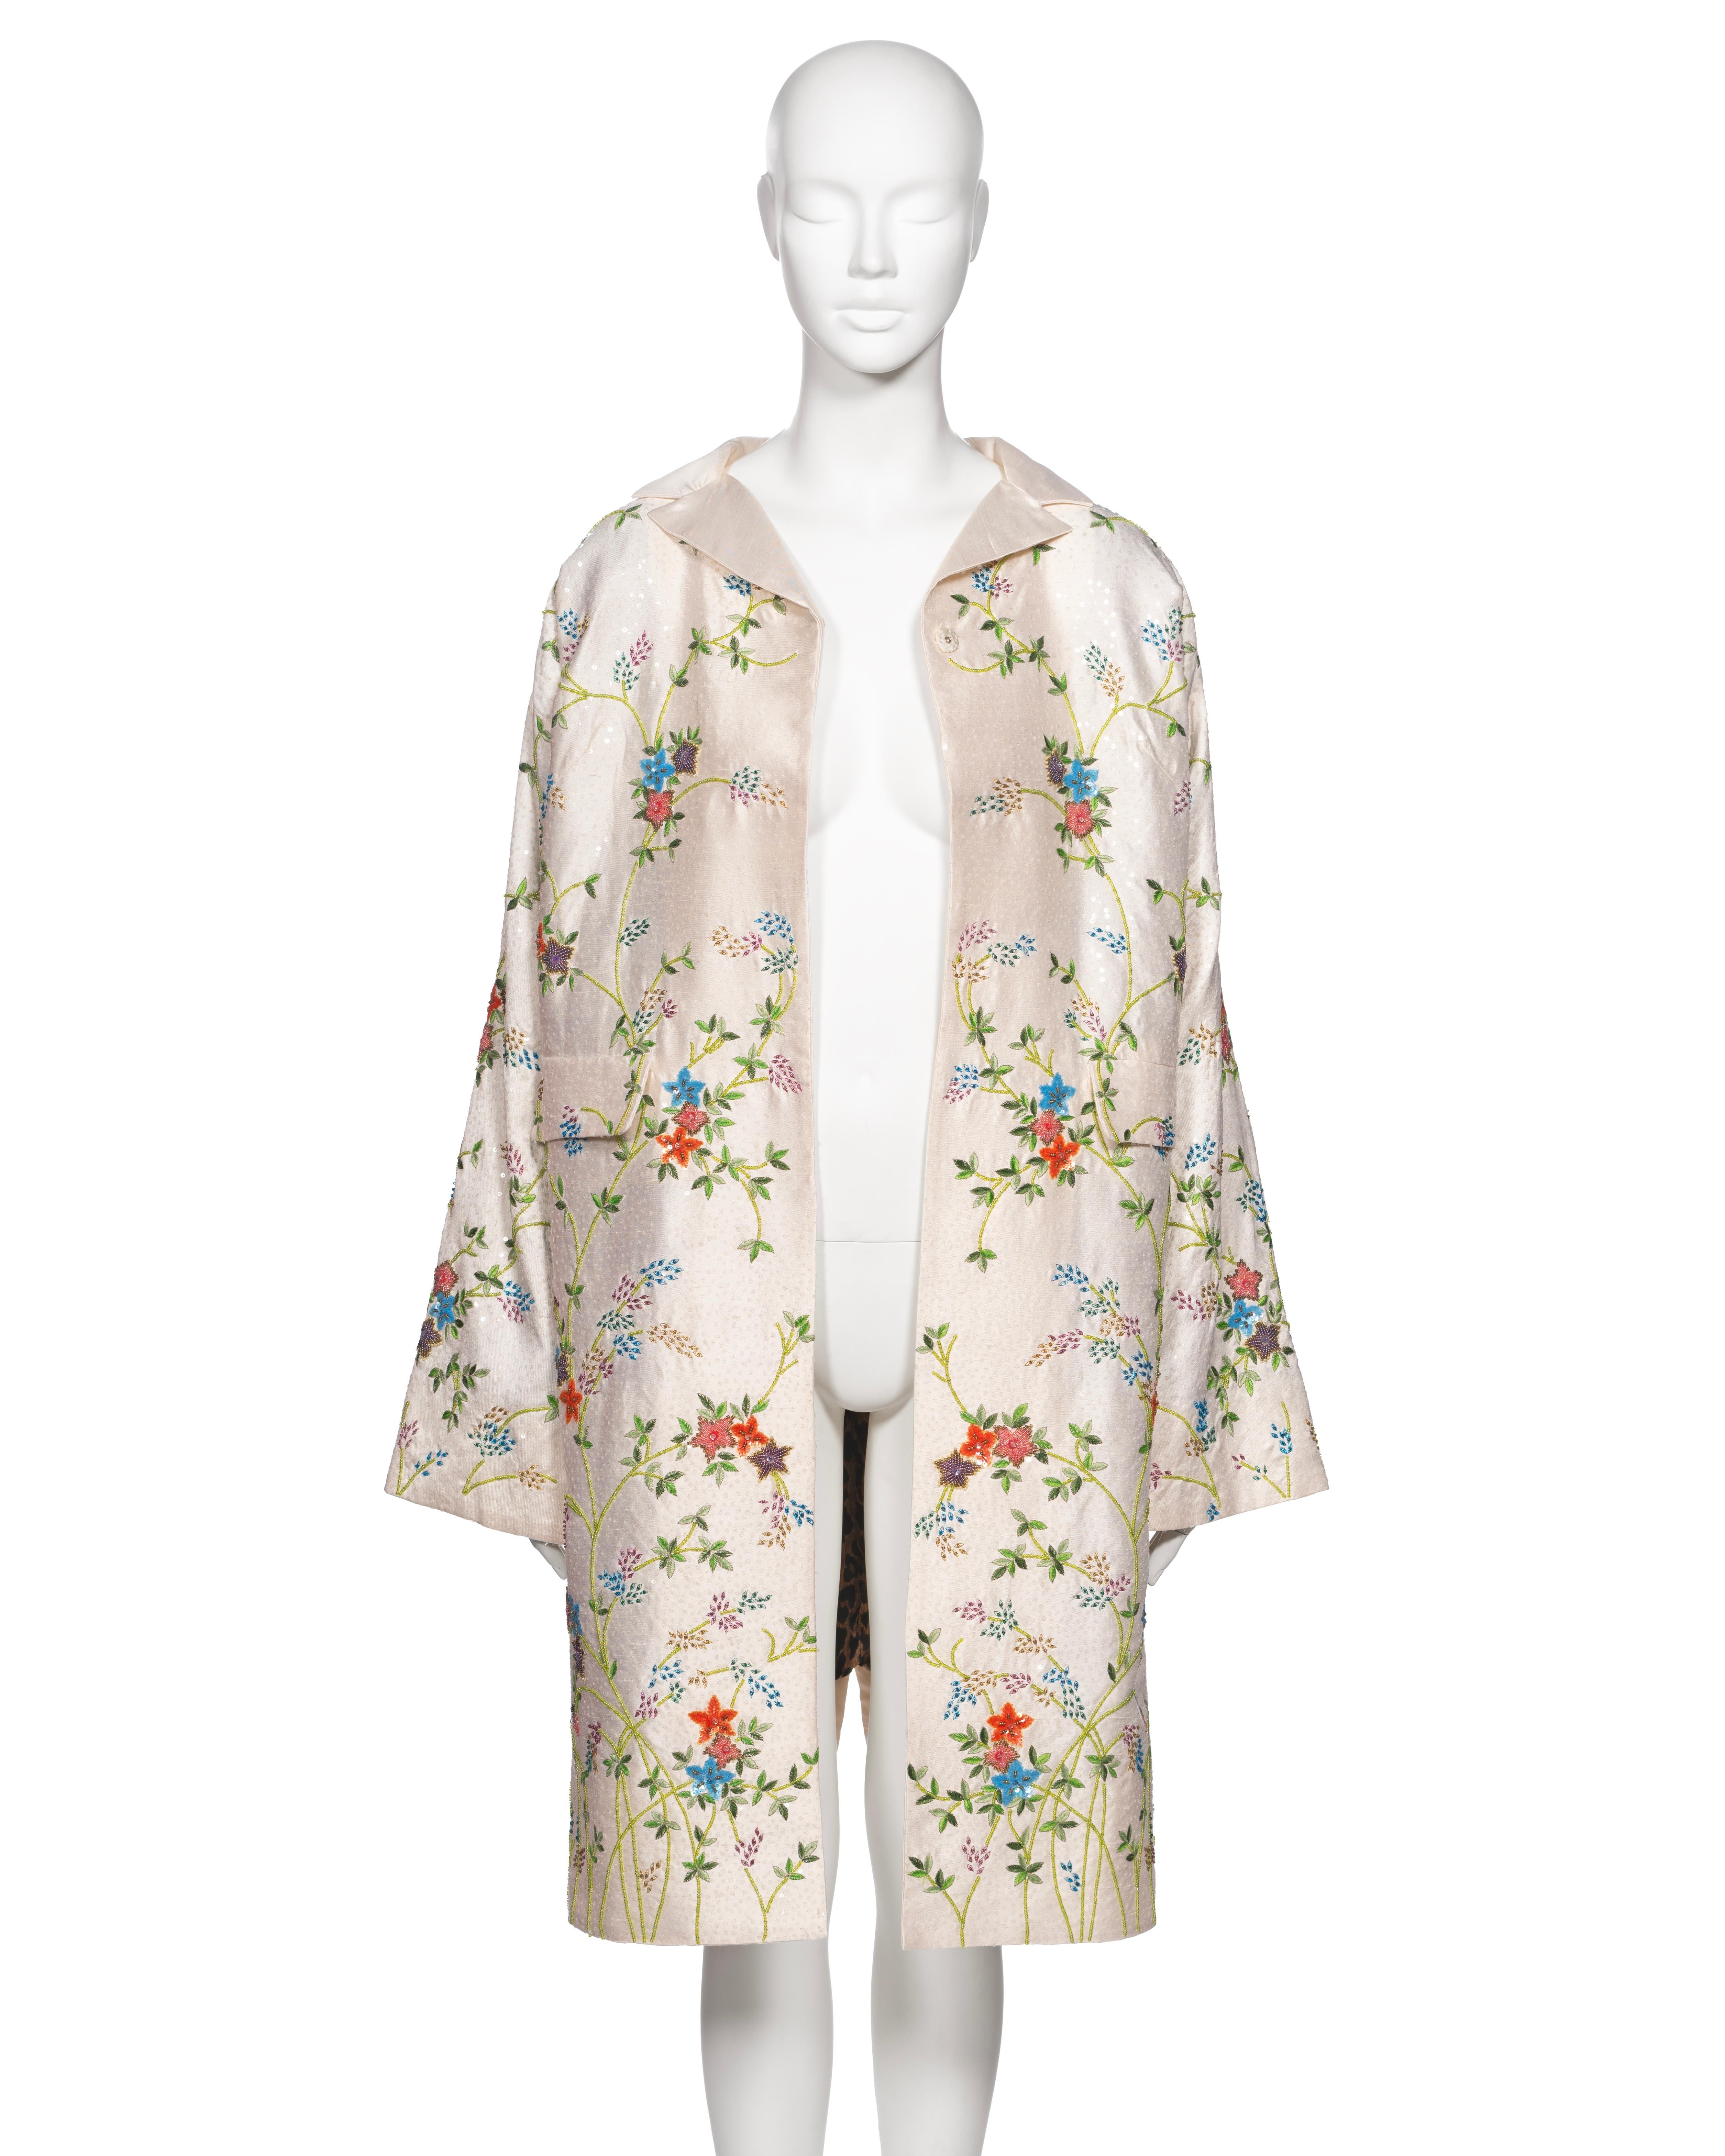 Dolce & Gabbana Hand-Embroidered White Raw Silk Evening Couture Coat, ss 1997 For Sale 3